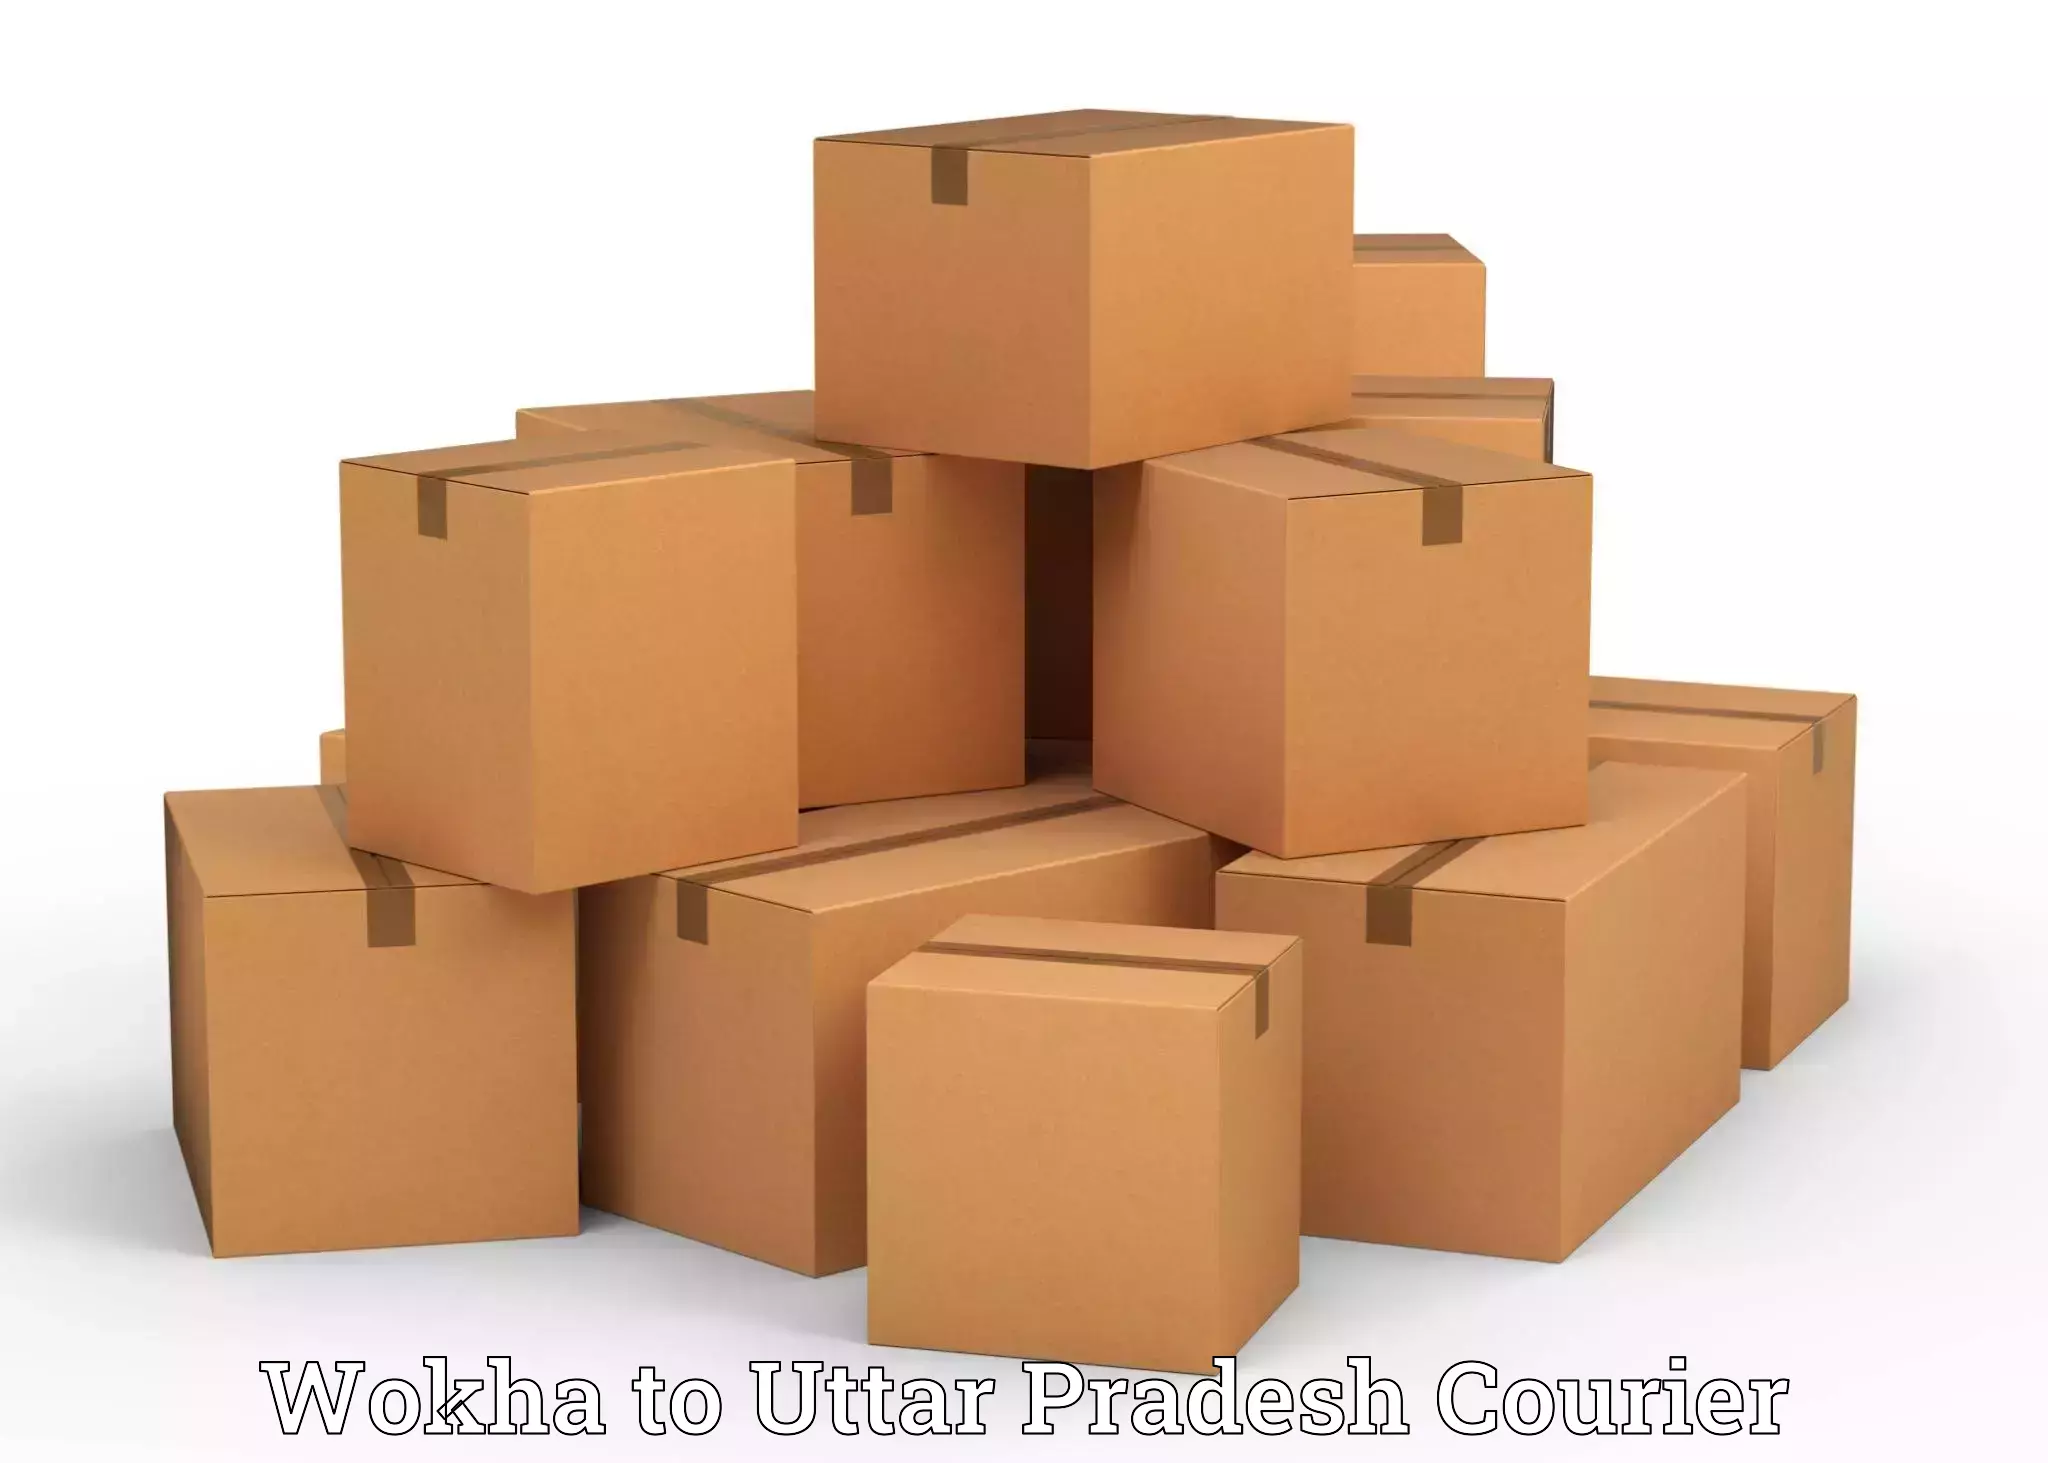 Professional relocation services Wokha to Rampur Maniharan